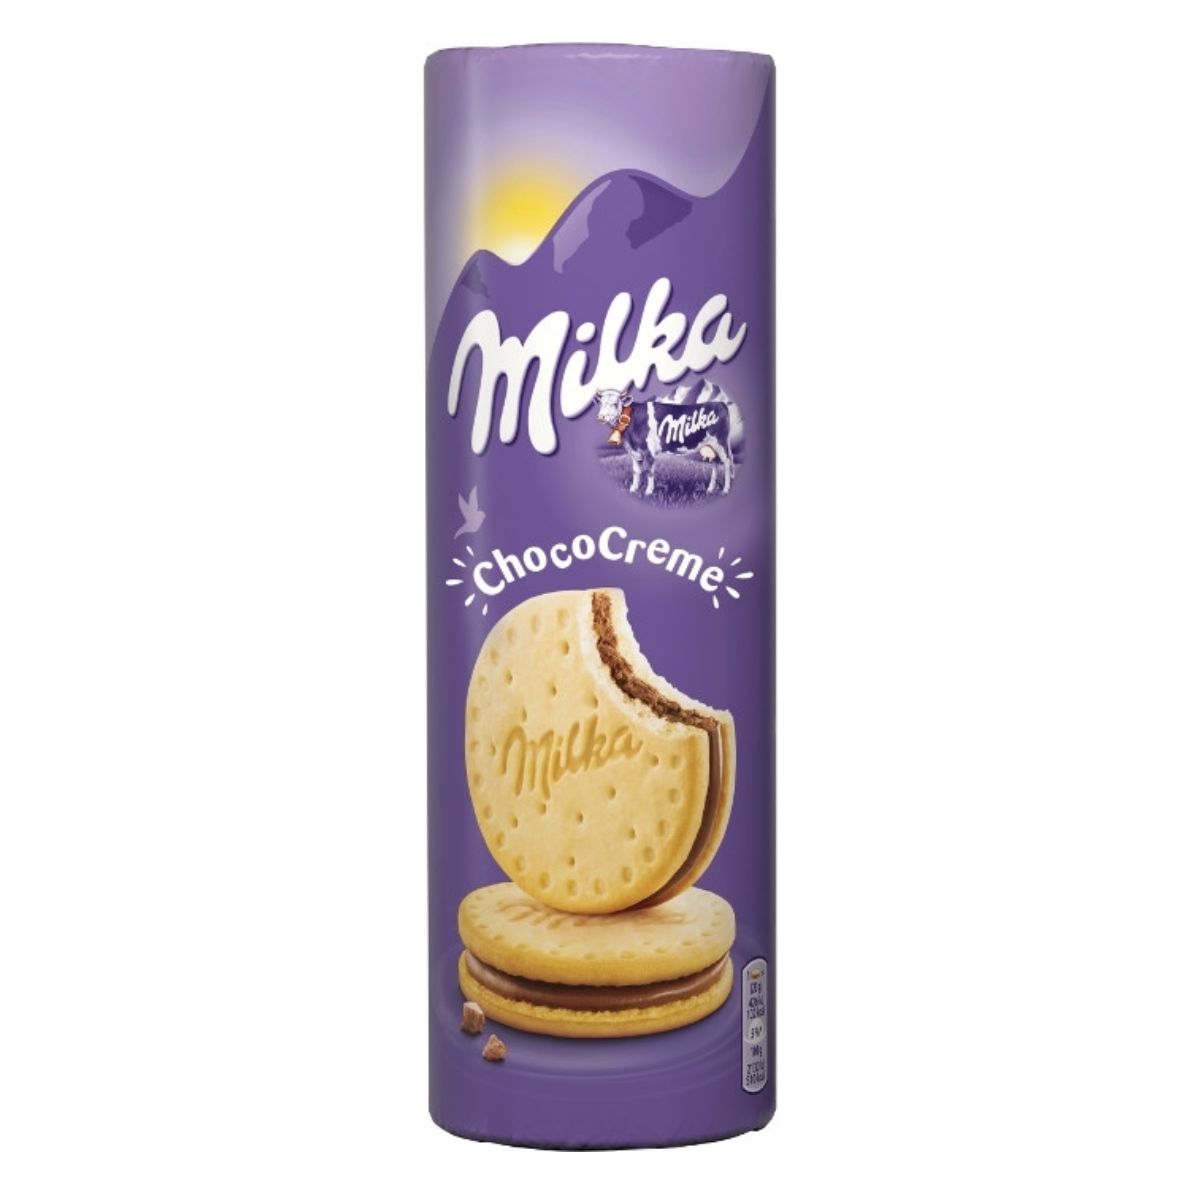 A can of Milka - Choco Creme Sandwich - 260g on a white background.